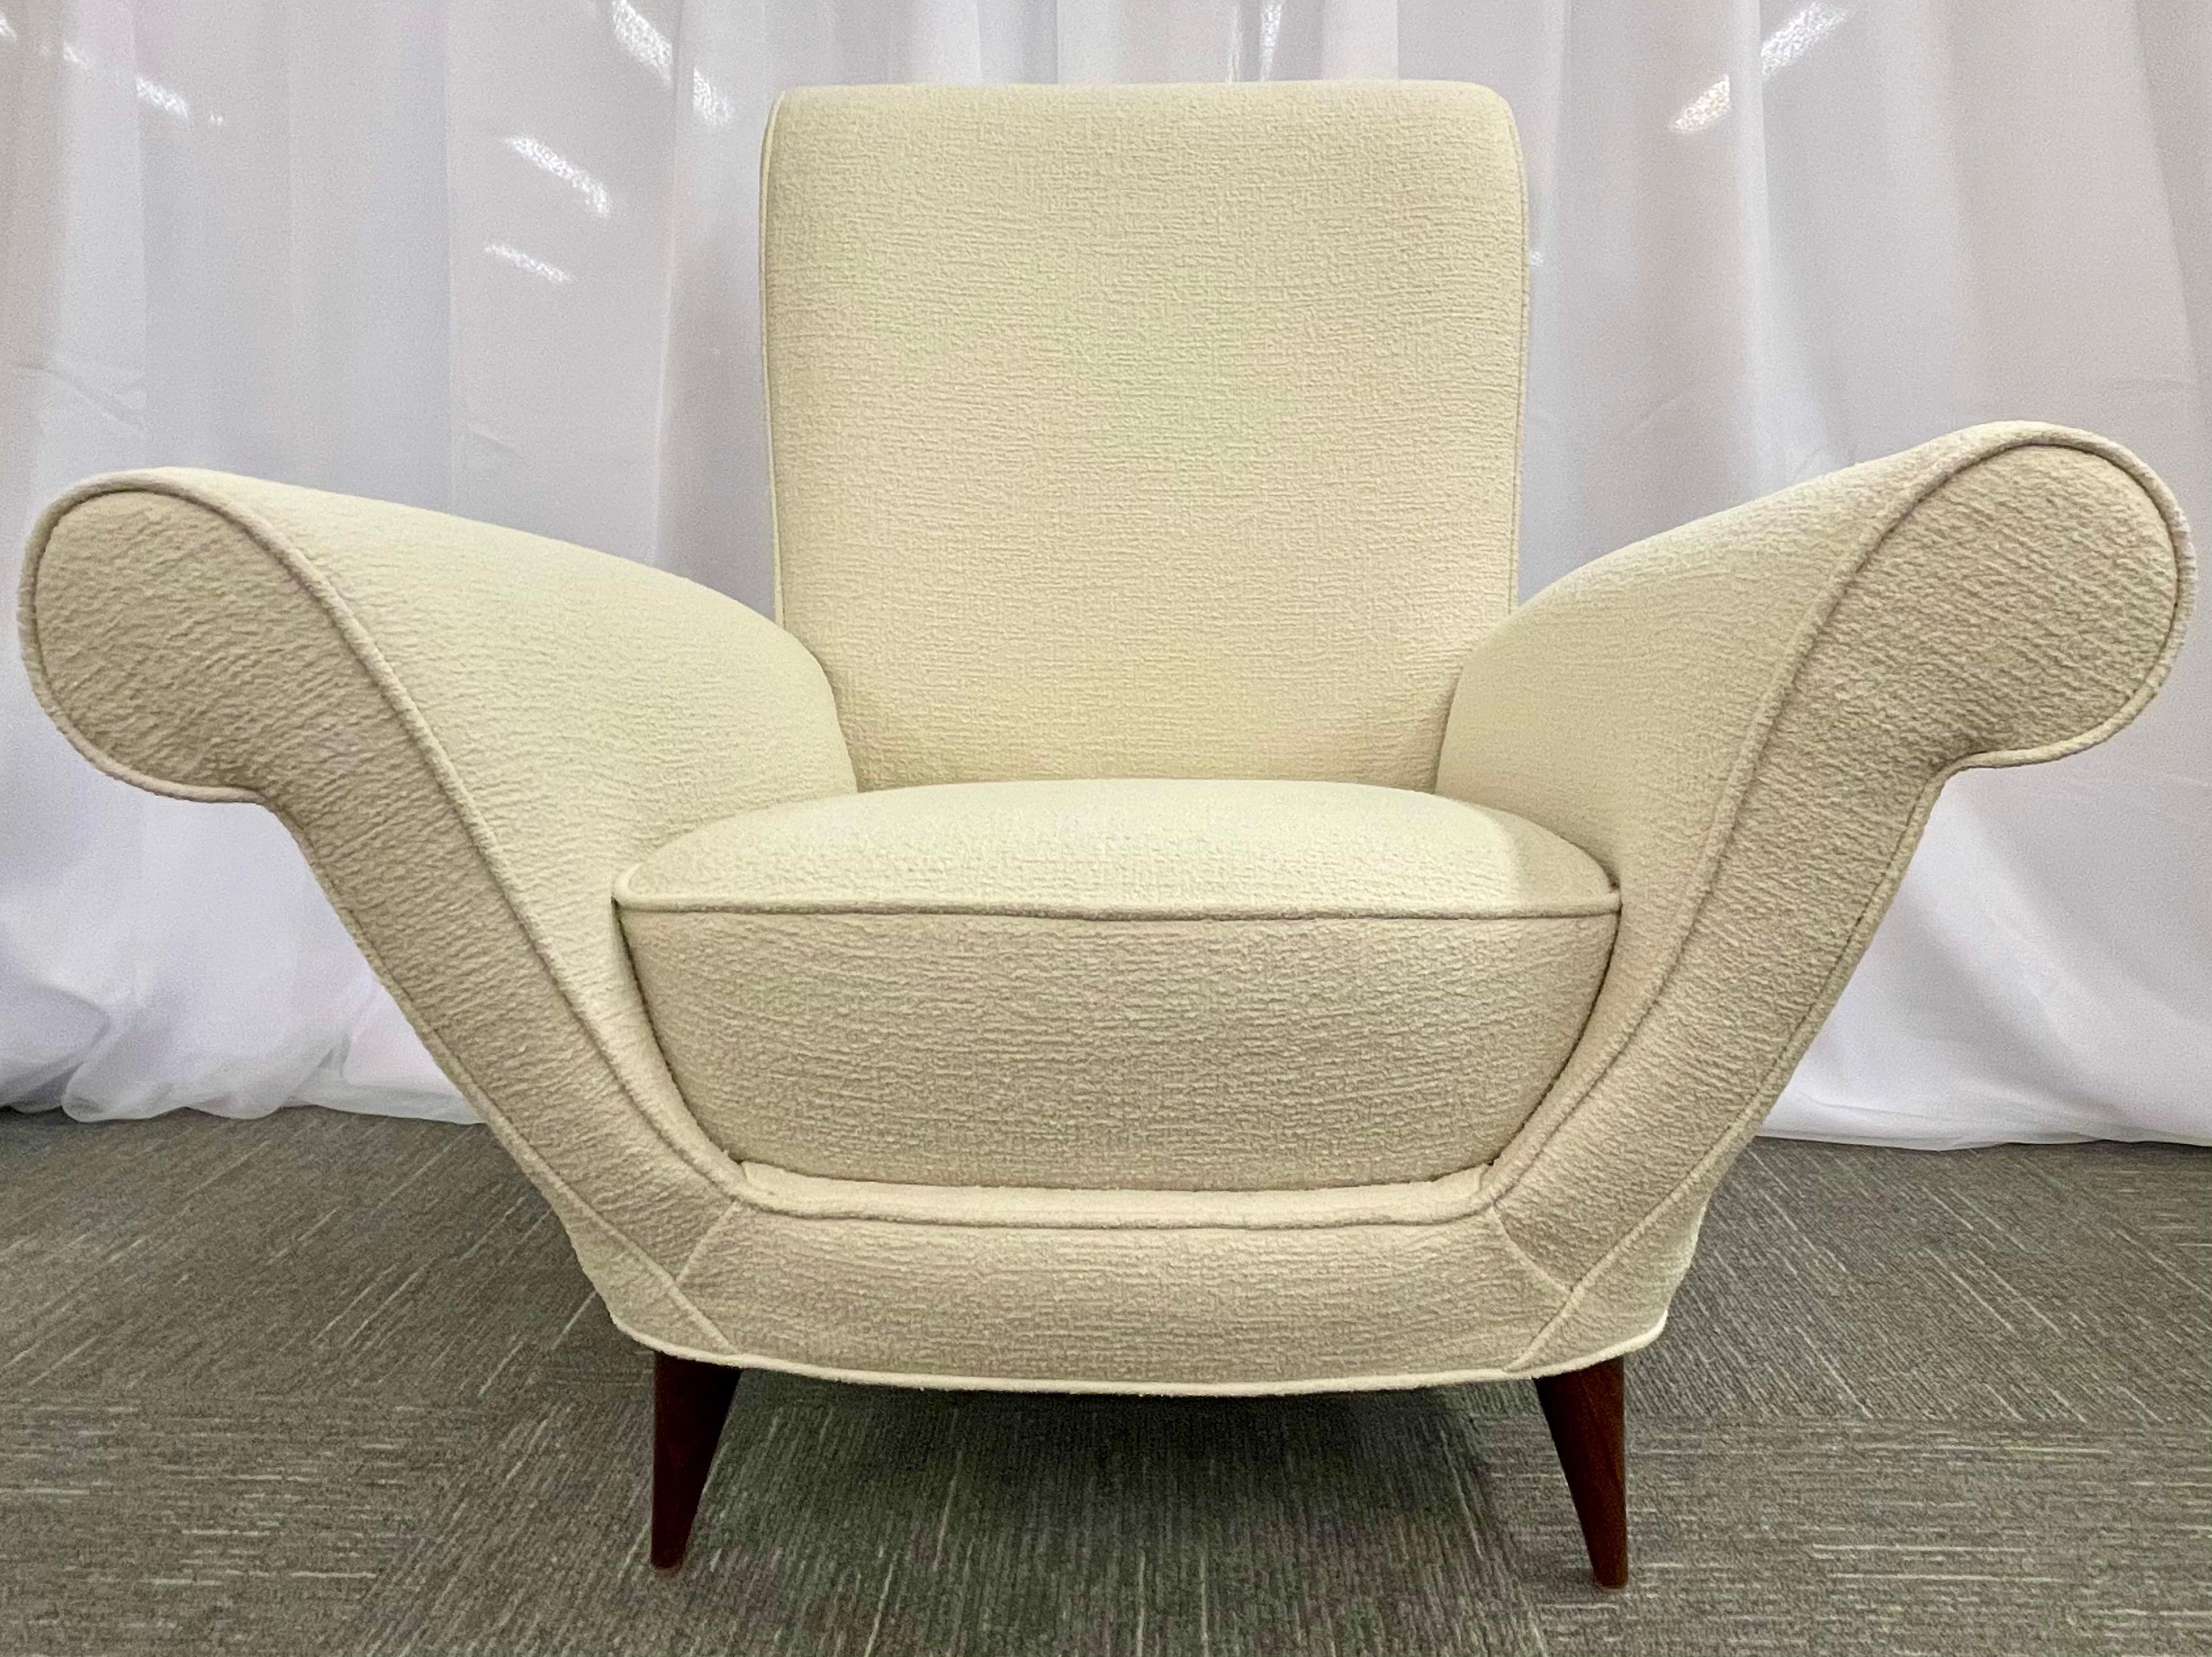 Paola Buffa Style, Mid-Century Modern, Lounge Chairs, White Bouclé, Italy, 1960s For Sale 4